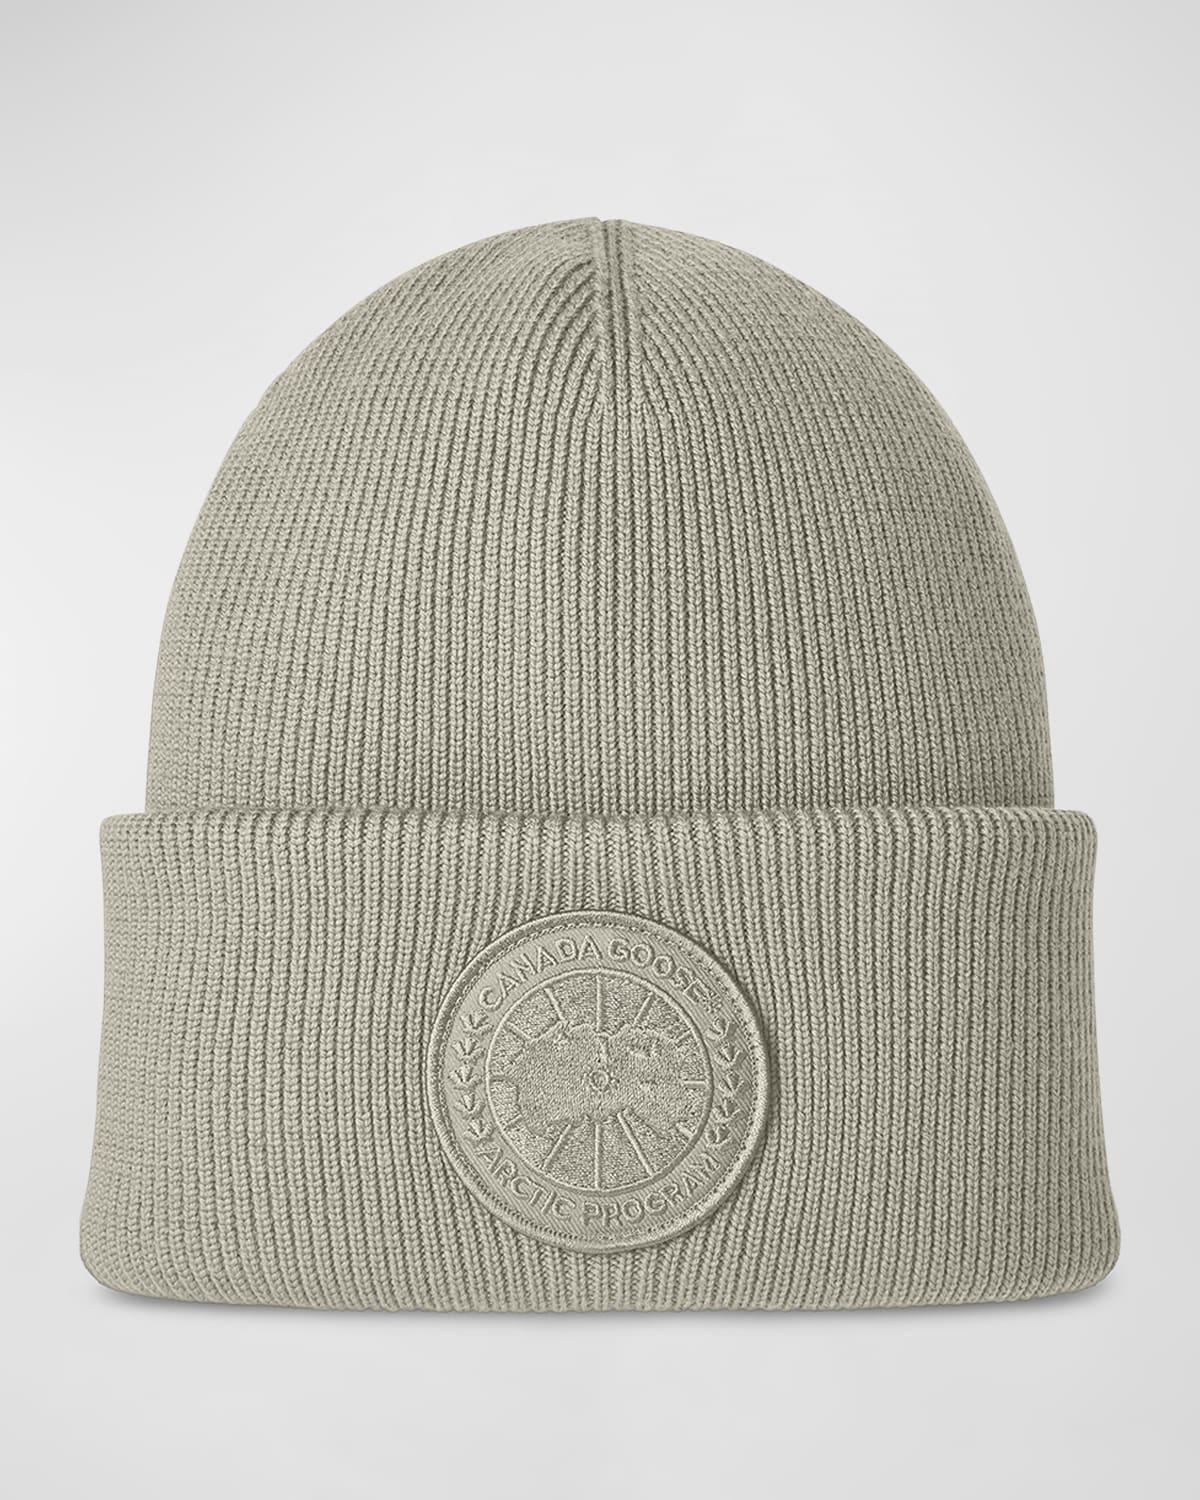 Canada Goose Arctic Toque Wool Knit Beanie In Limestone